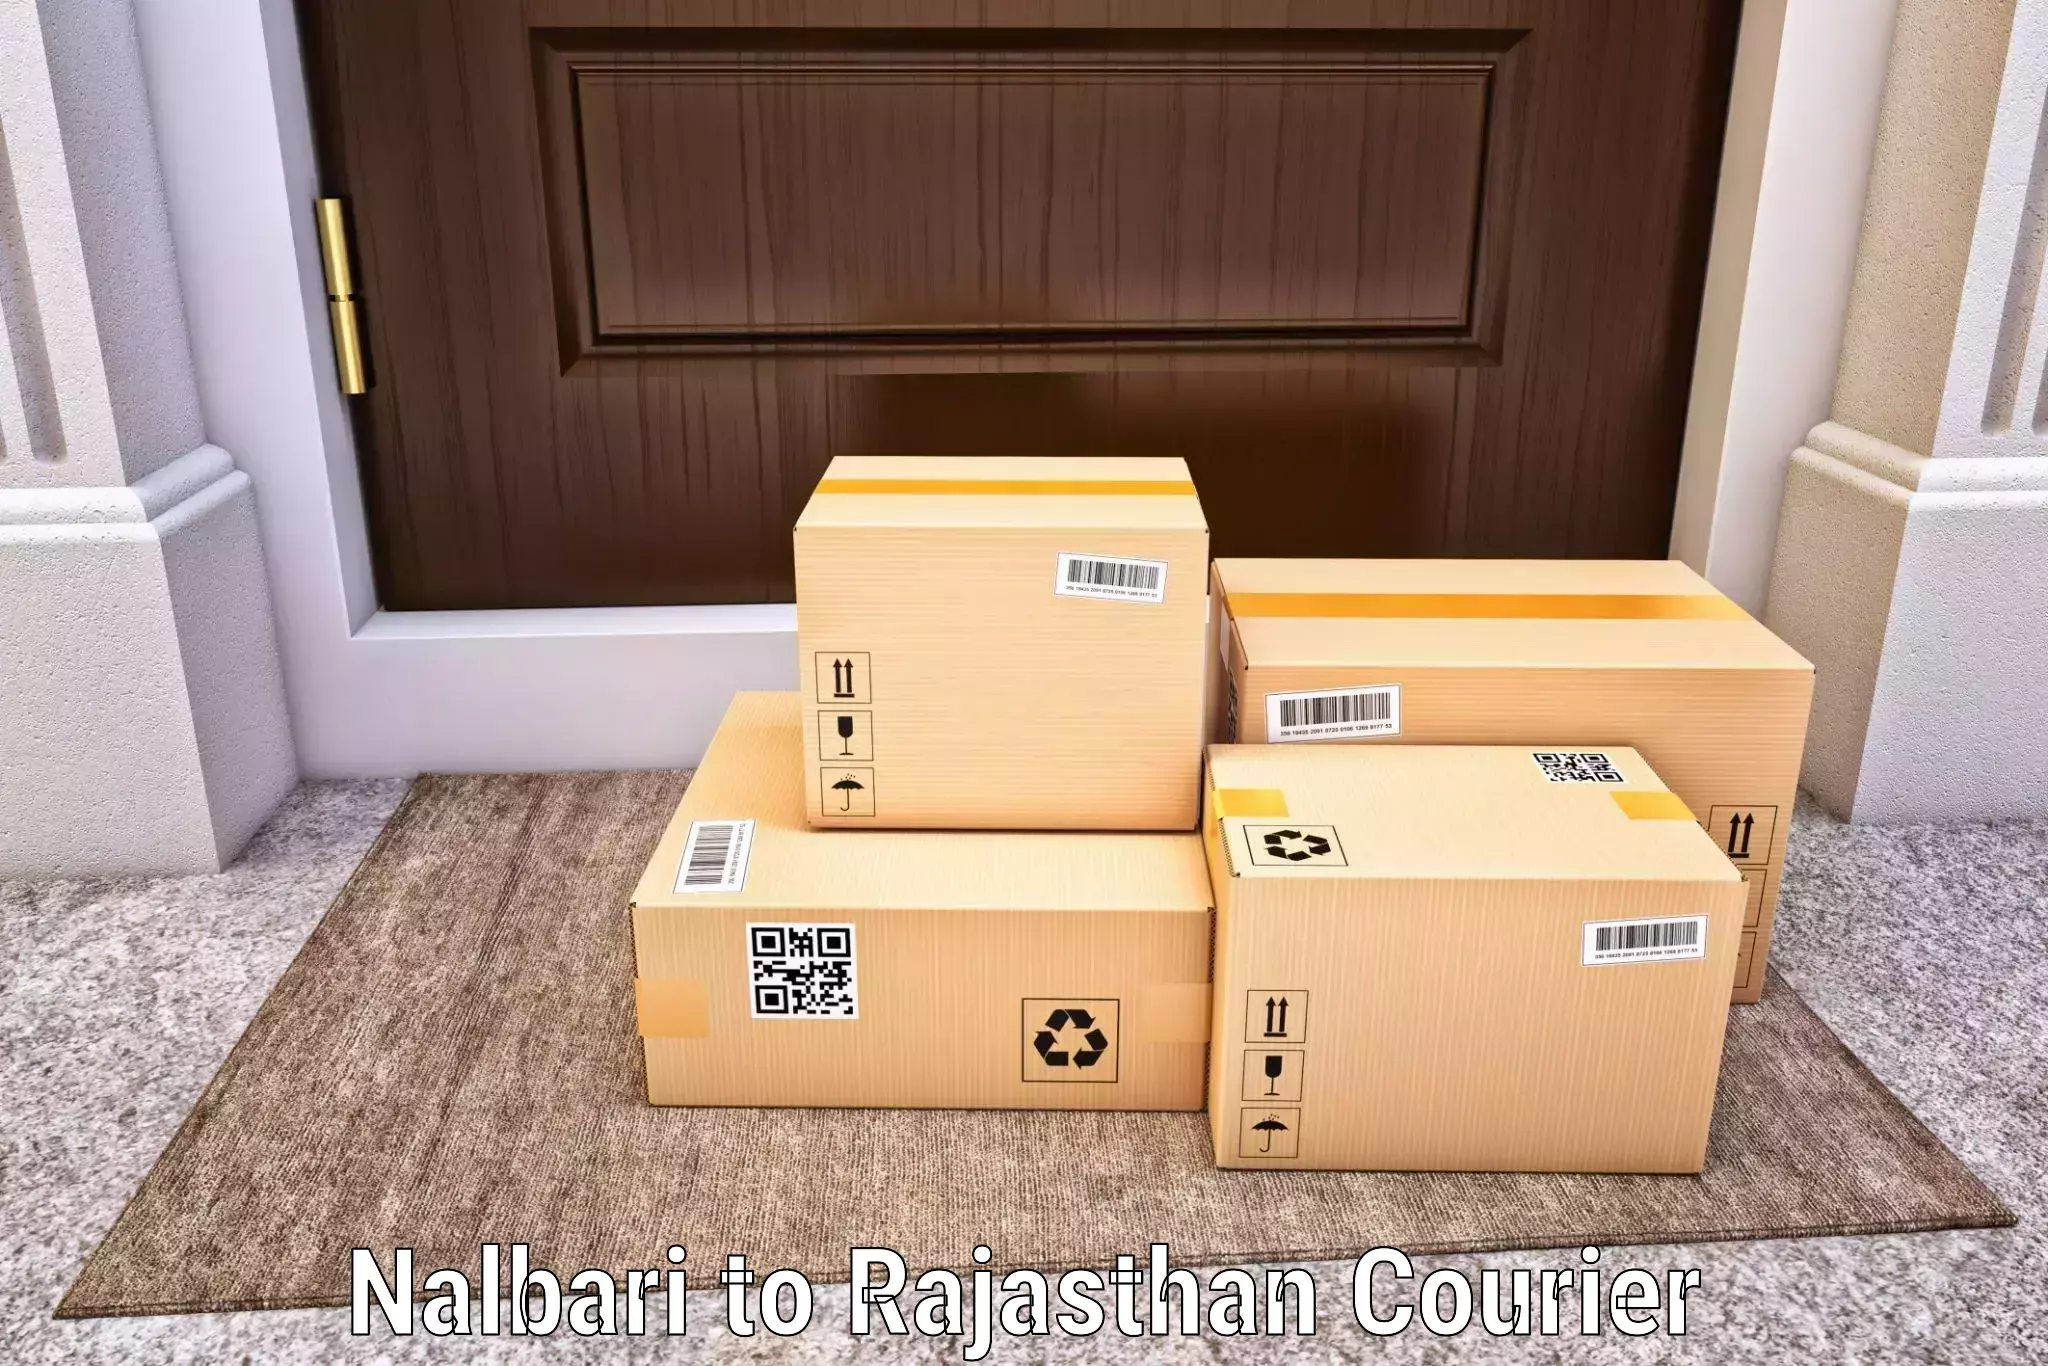 Flexible delivery schedules Nalbari to Mathania